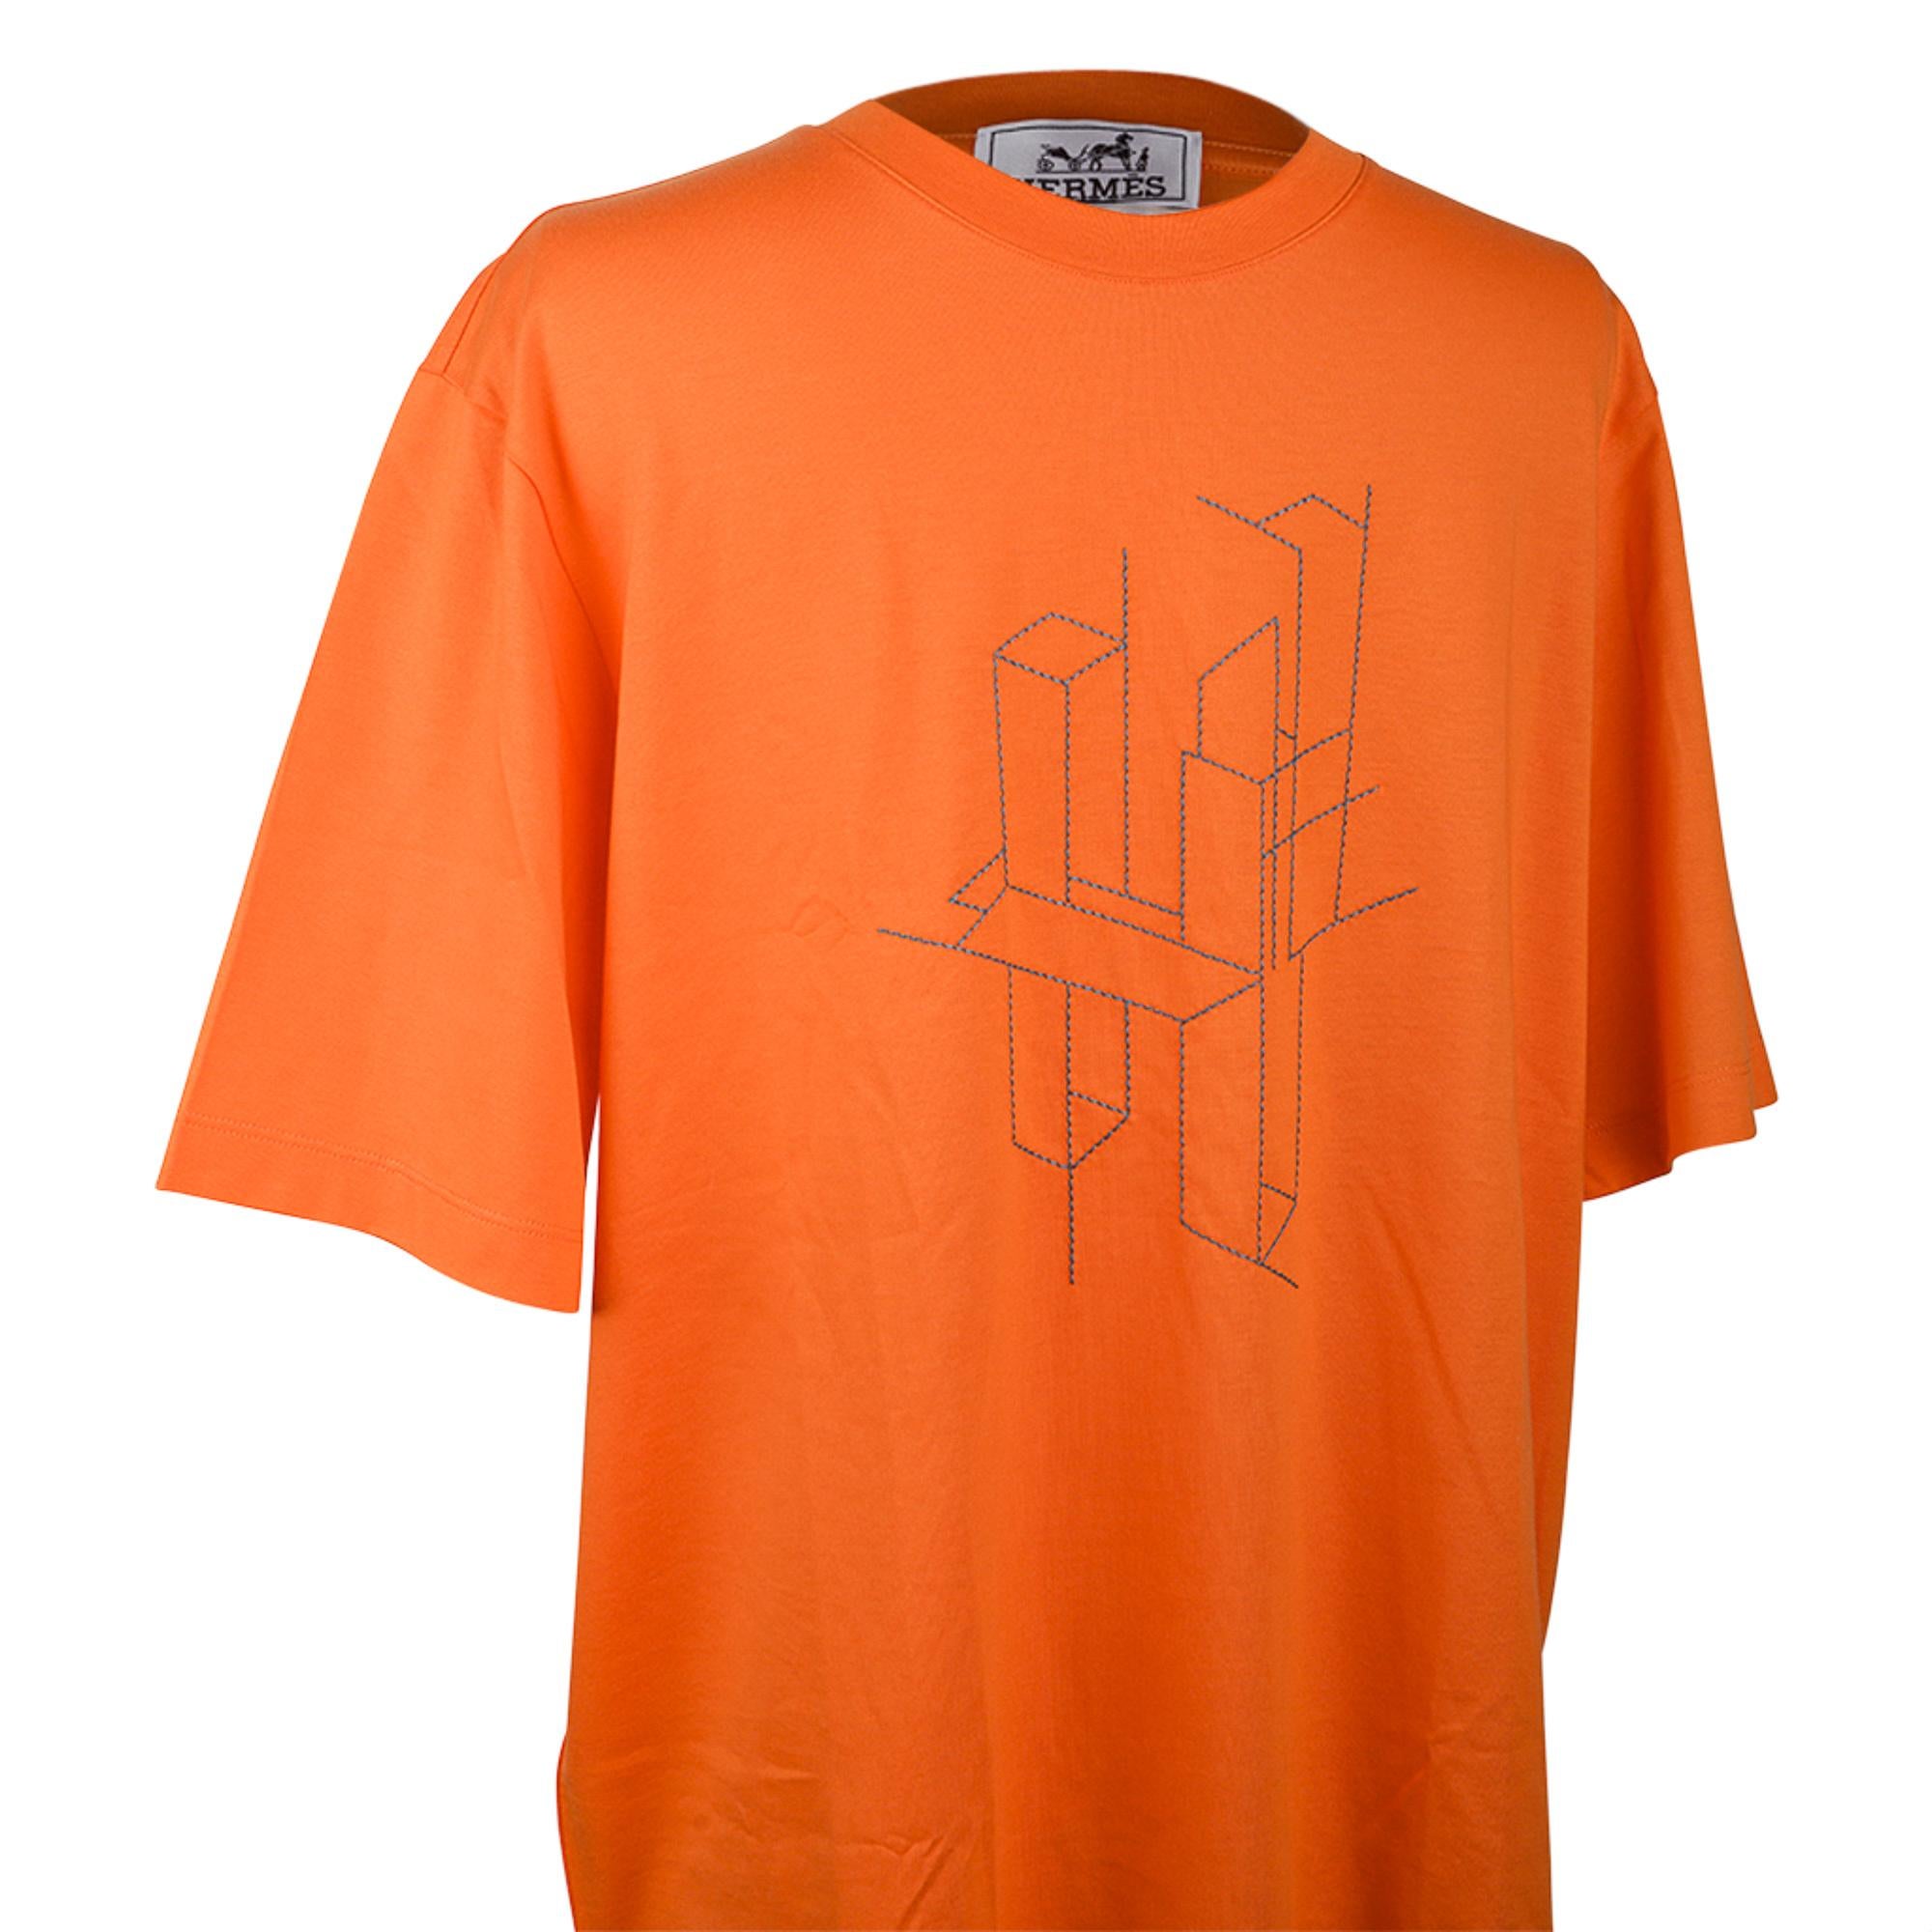 Hermes H 3D Embroidery T-Shirt featured in Hermes Orange.
Depicts embroidered H 3D.
Short sleeve T with crew neck.
Fabric is cotton.
NEW or NEVER WORN.
final sale

SIZE M

TOP MEASURES:
LENGTH 28.5